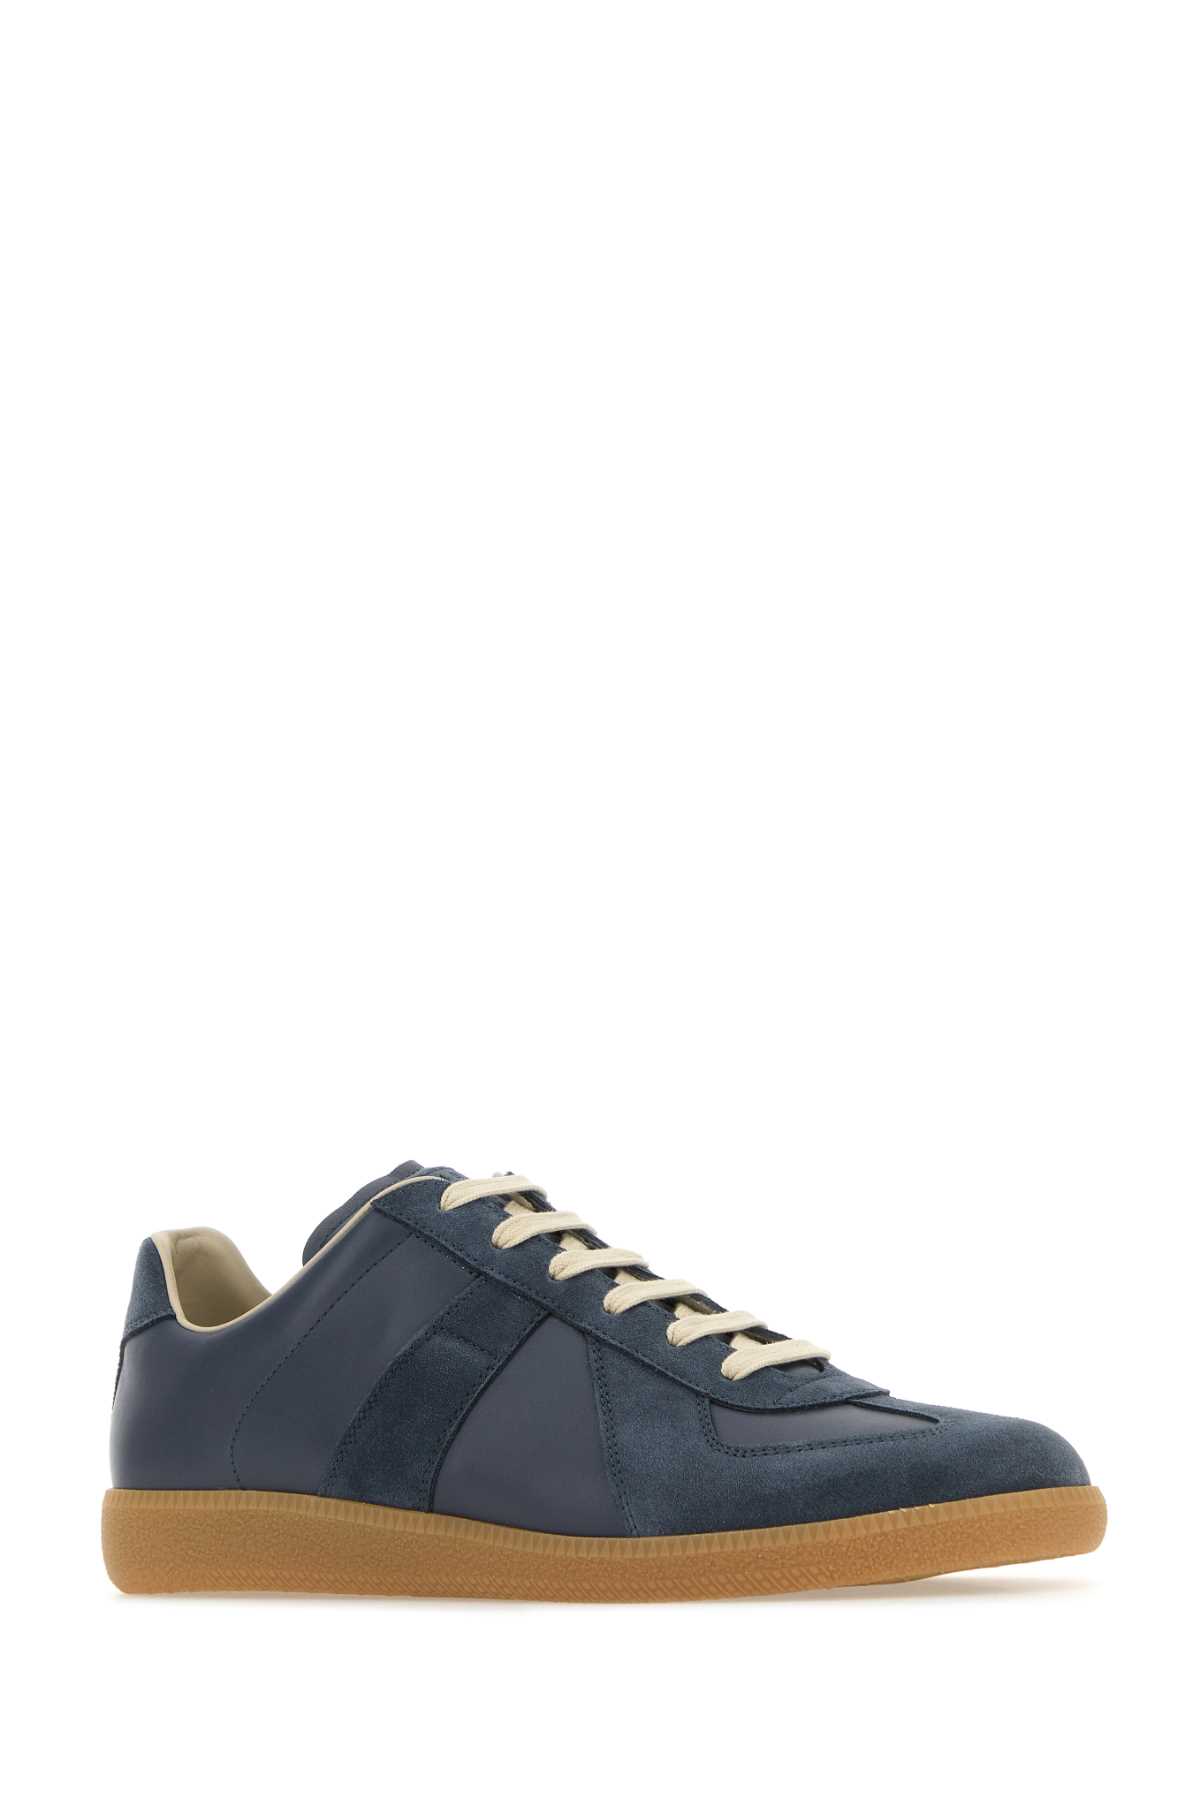 MAISON MARGIELA BLUE LEATHER AND SUEDE REPLICA SNEAKERS